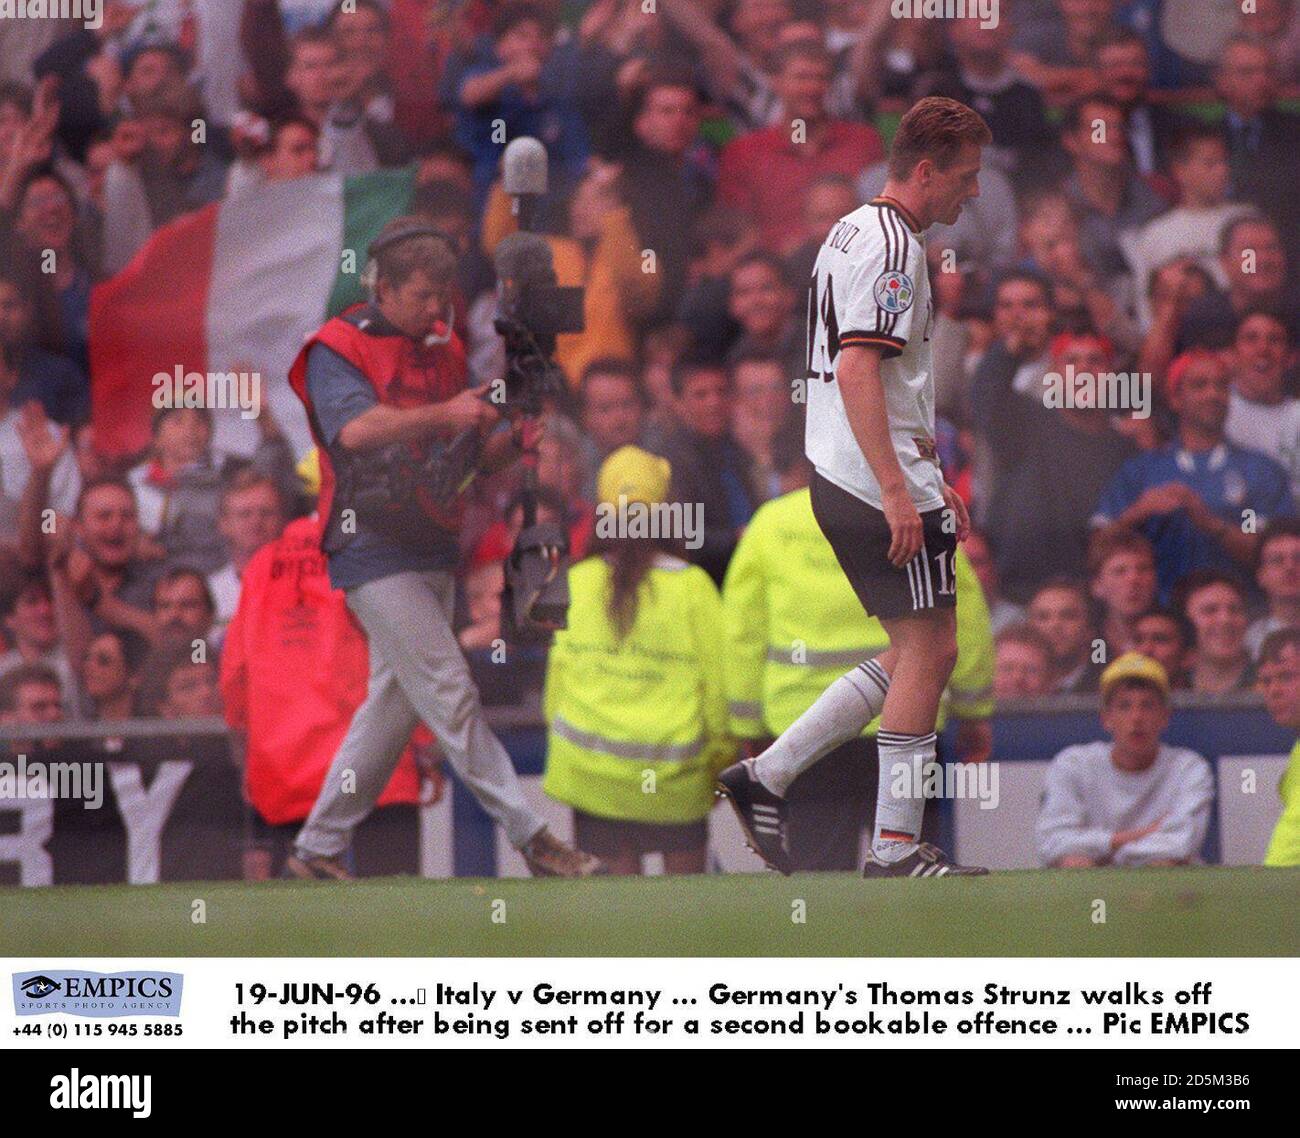 19-JUN-96 ...  Italy v Germany ... Germany's Thomas Strunz walks off the pitch after being sent off for a second bookable offence Stock Photo